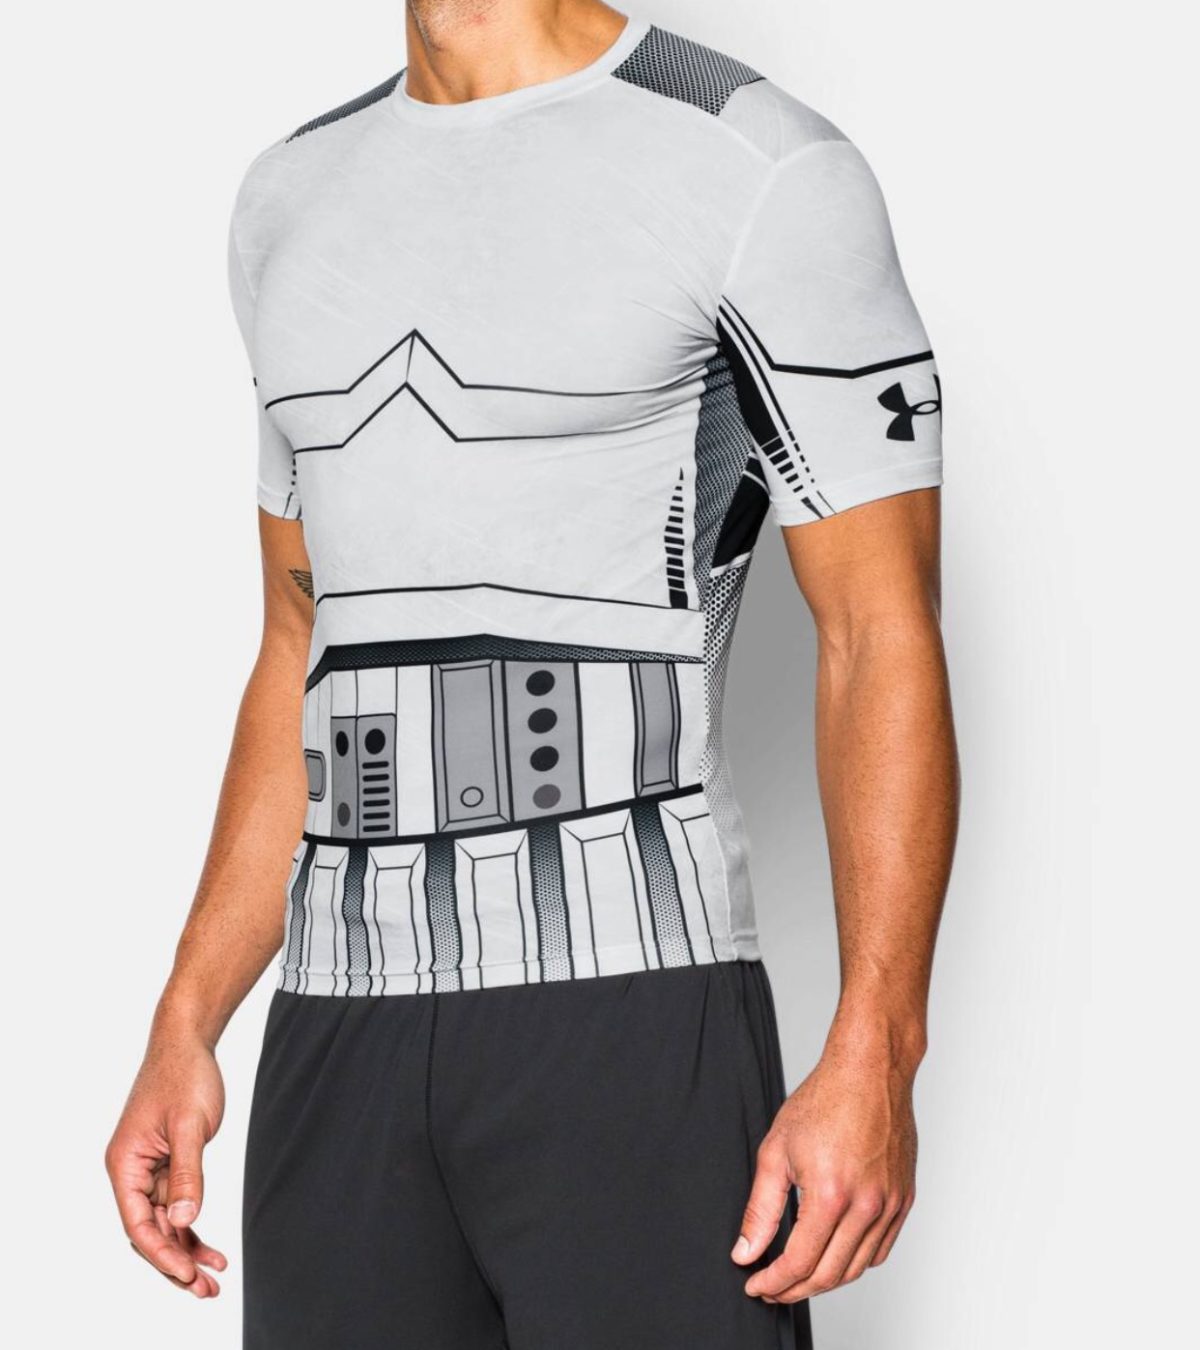 Work Out With The Force In The New Under Armour Star Wars Line